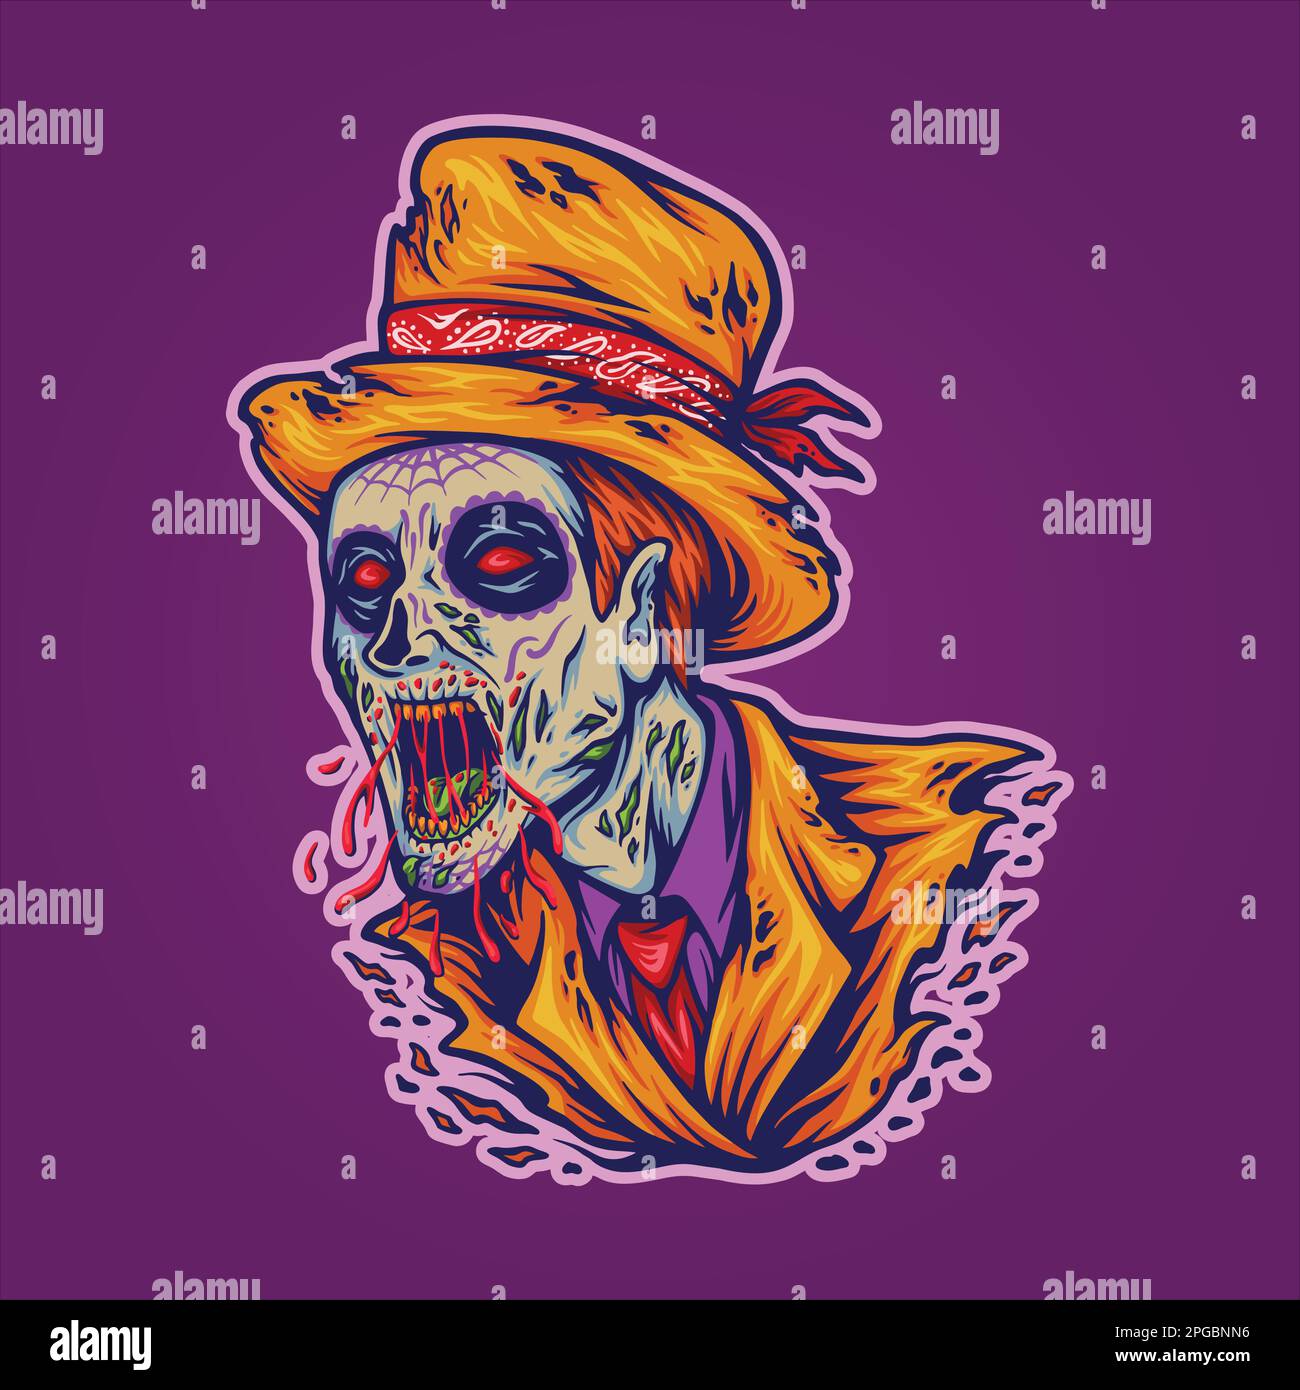 Spooky monster head krueger face logo cartoon illustrations vector for your work logo, merchandise t-shirt, stickers and label designs, poster, greeti Stock Vector